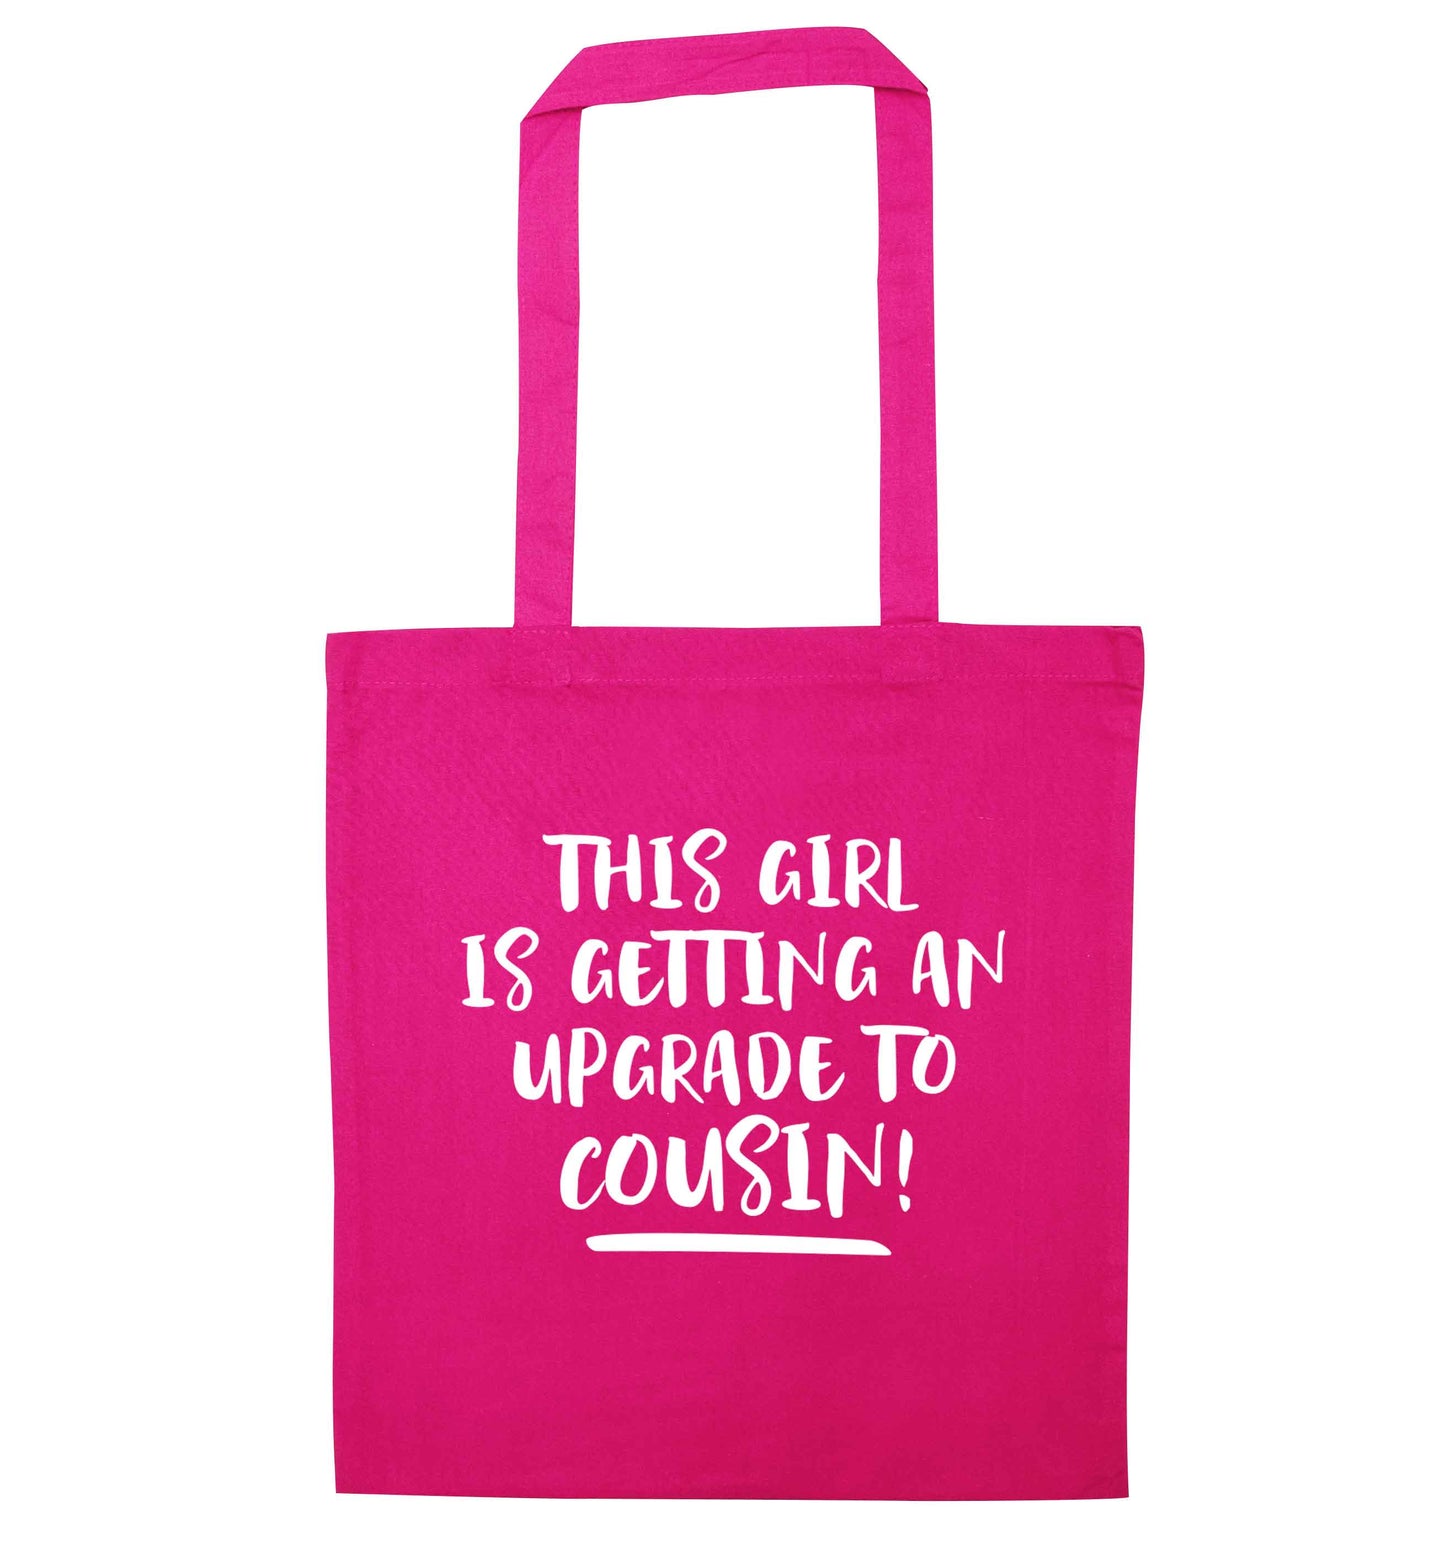 This girl is getting an upgrade to cousin! pink tote bag